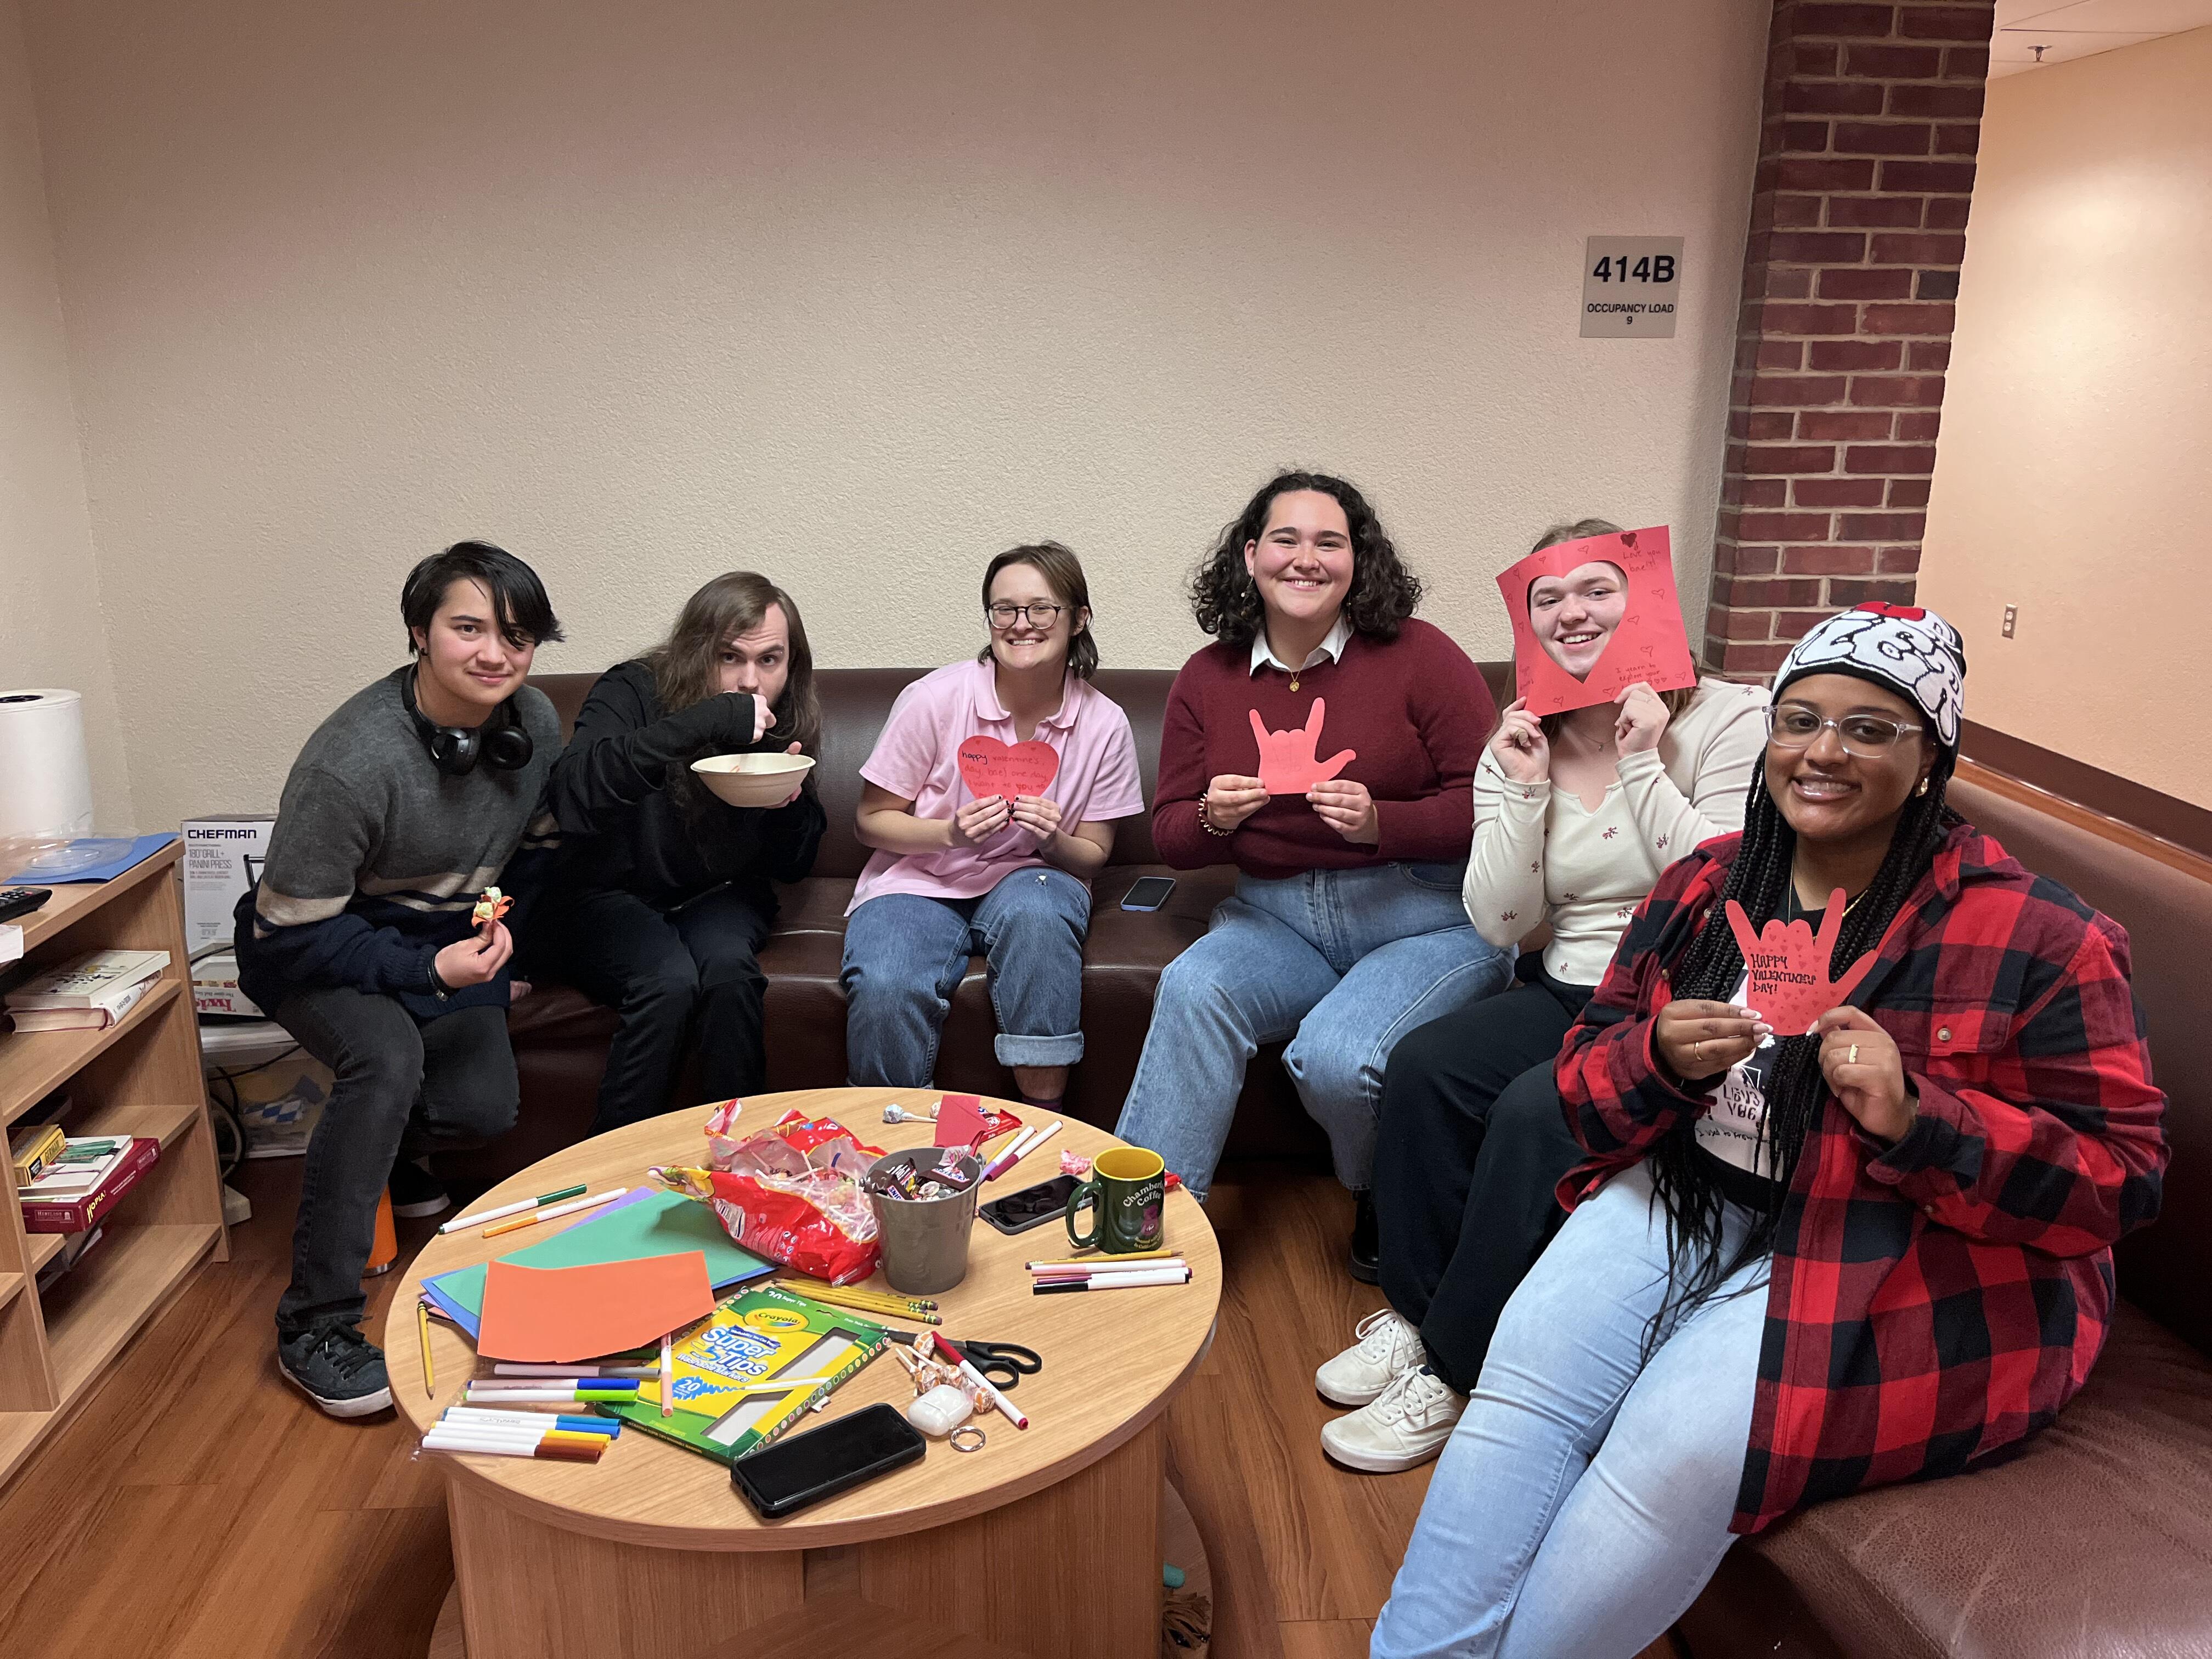 ASL pod members and the valentines they made.